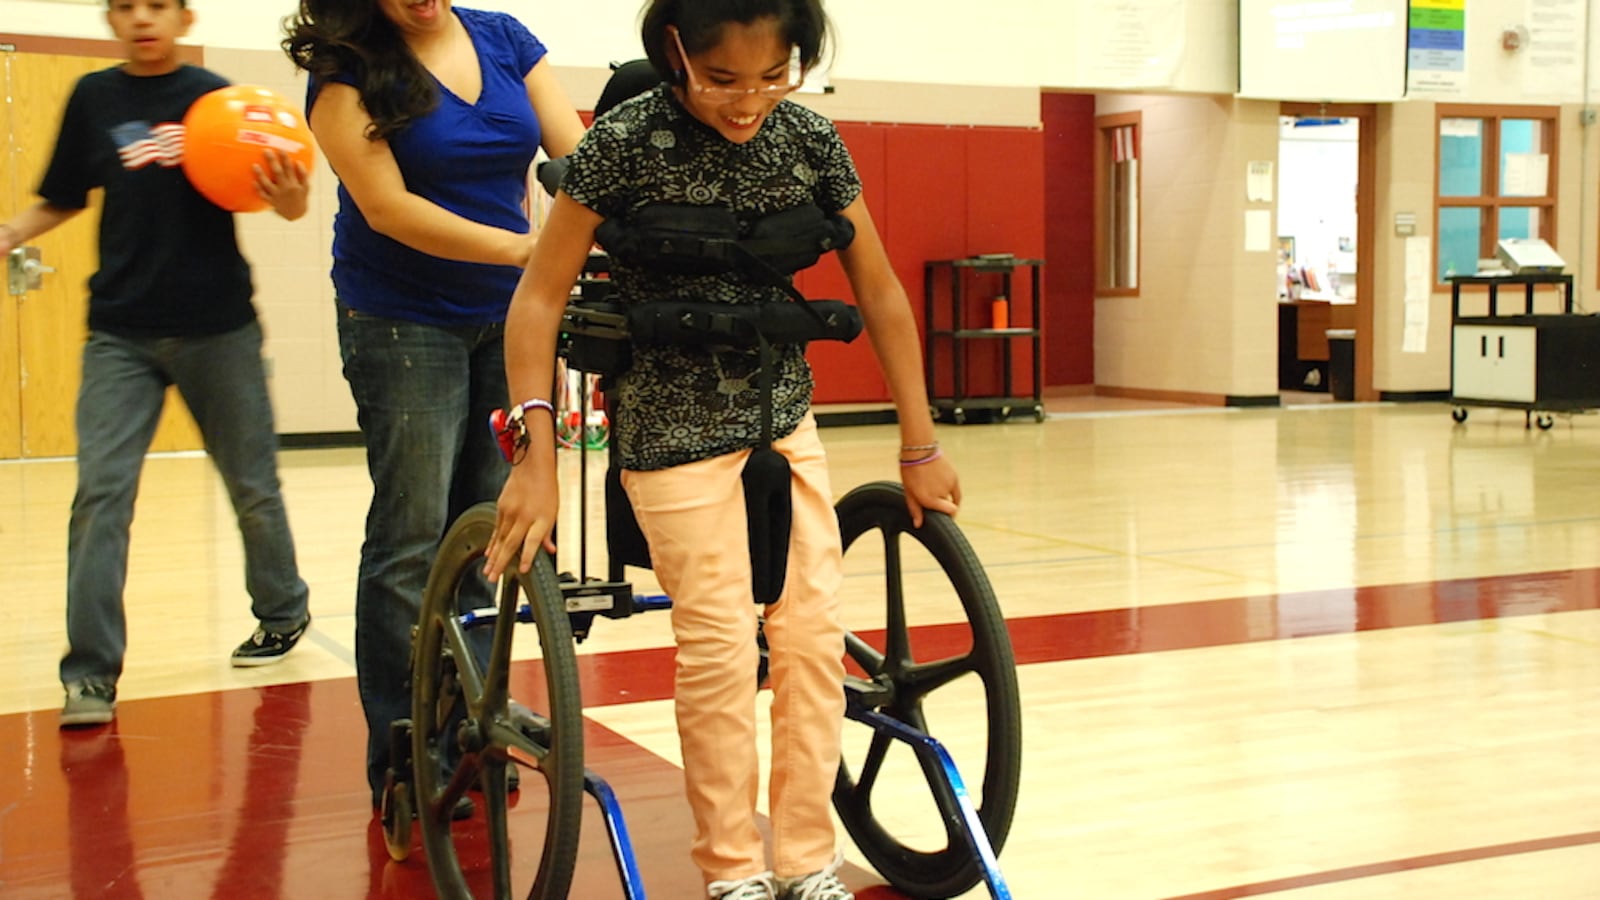 Gabi, a student at Bruce Randolph School, works with a paraprofessional during a recent adapted physical education class there.